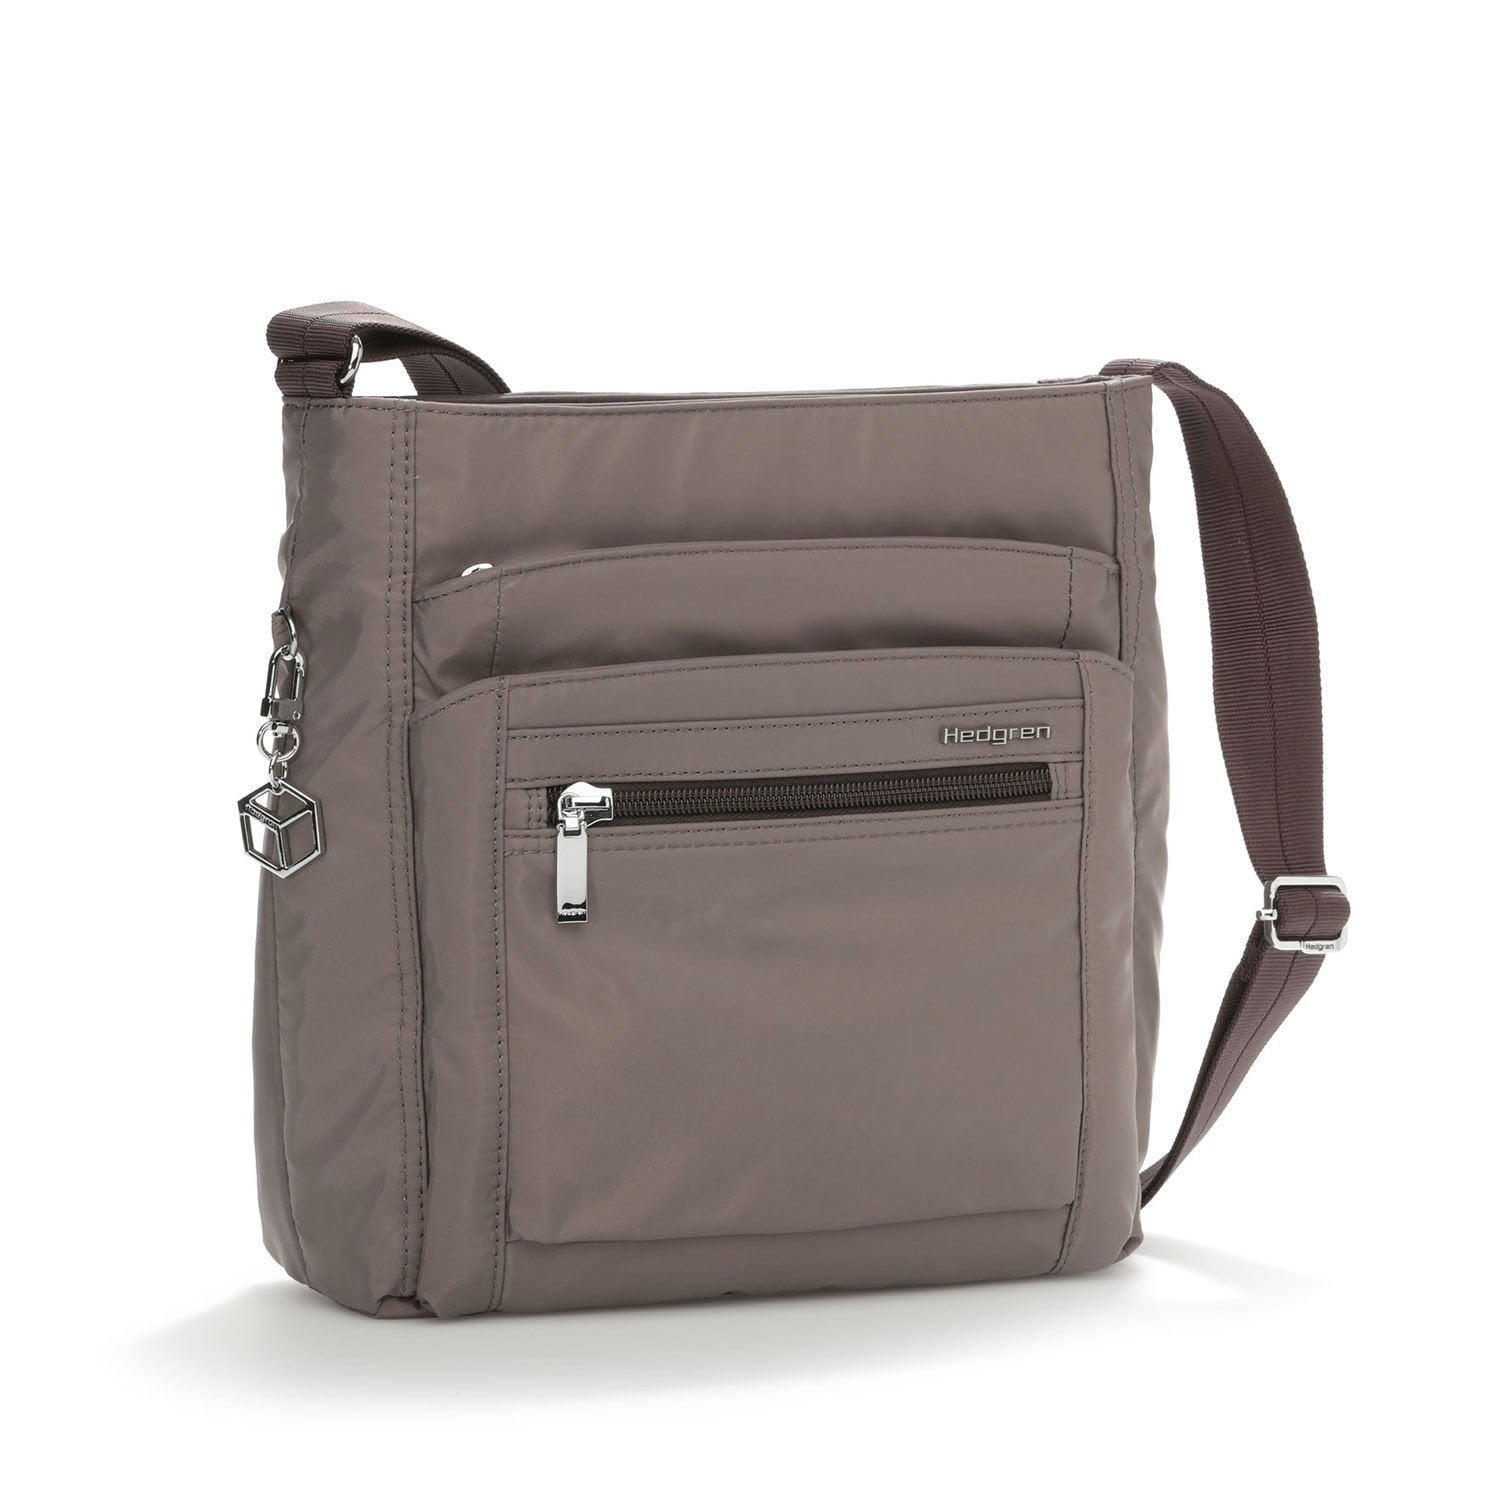 Hedgren Inner City Crossbody with RFID Blocking Pouch - Sepia/Brown